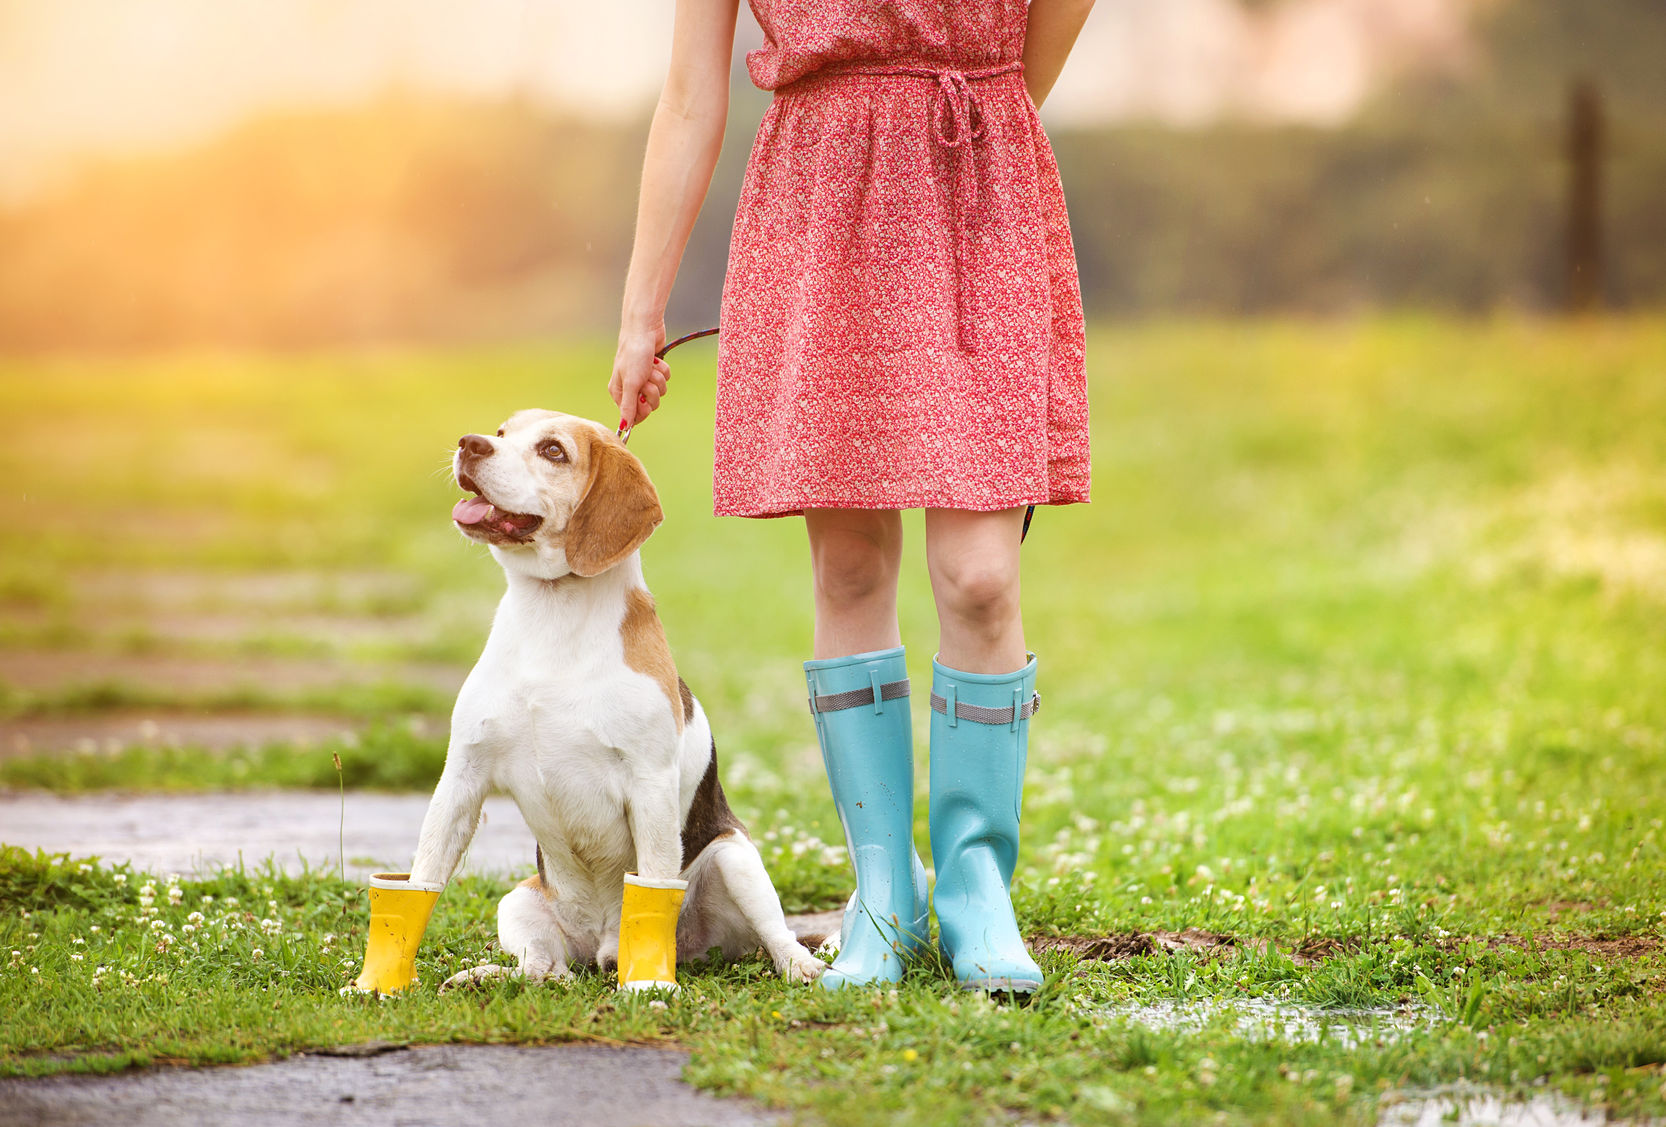  young woman in dress and turquoise wellies walk her beagle dog in a park